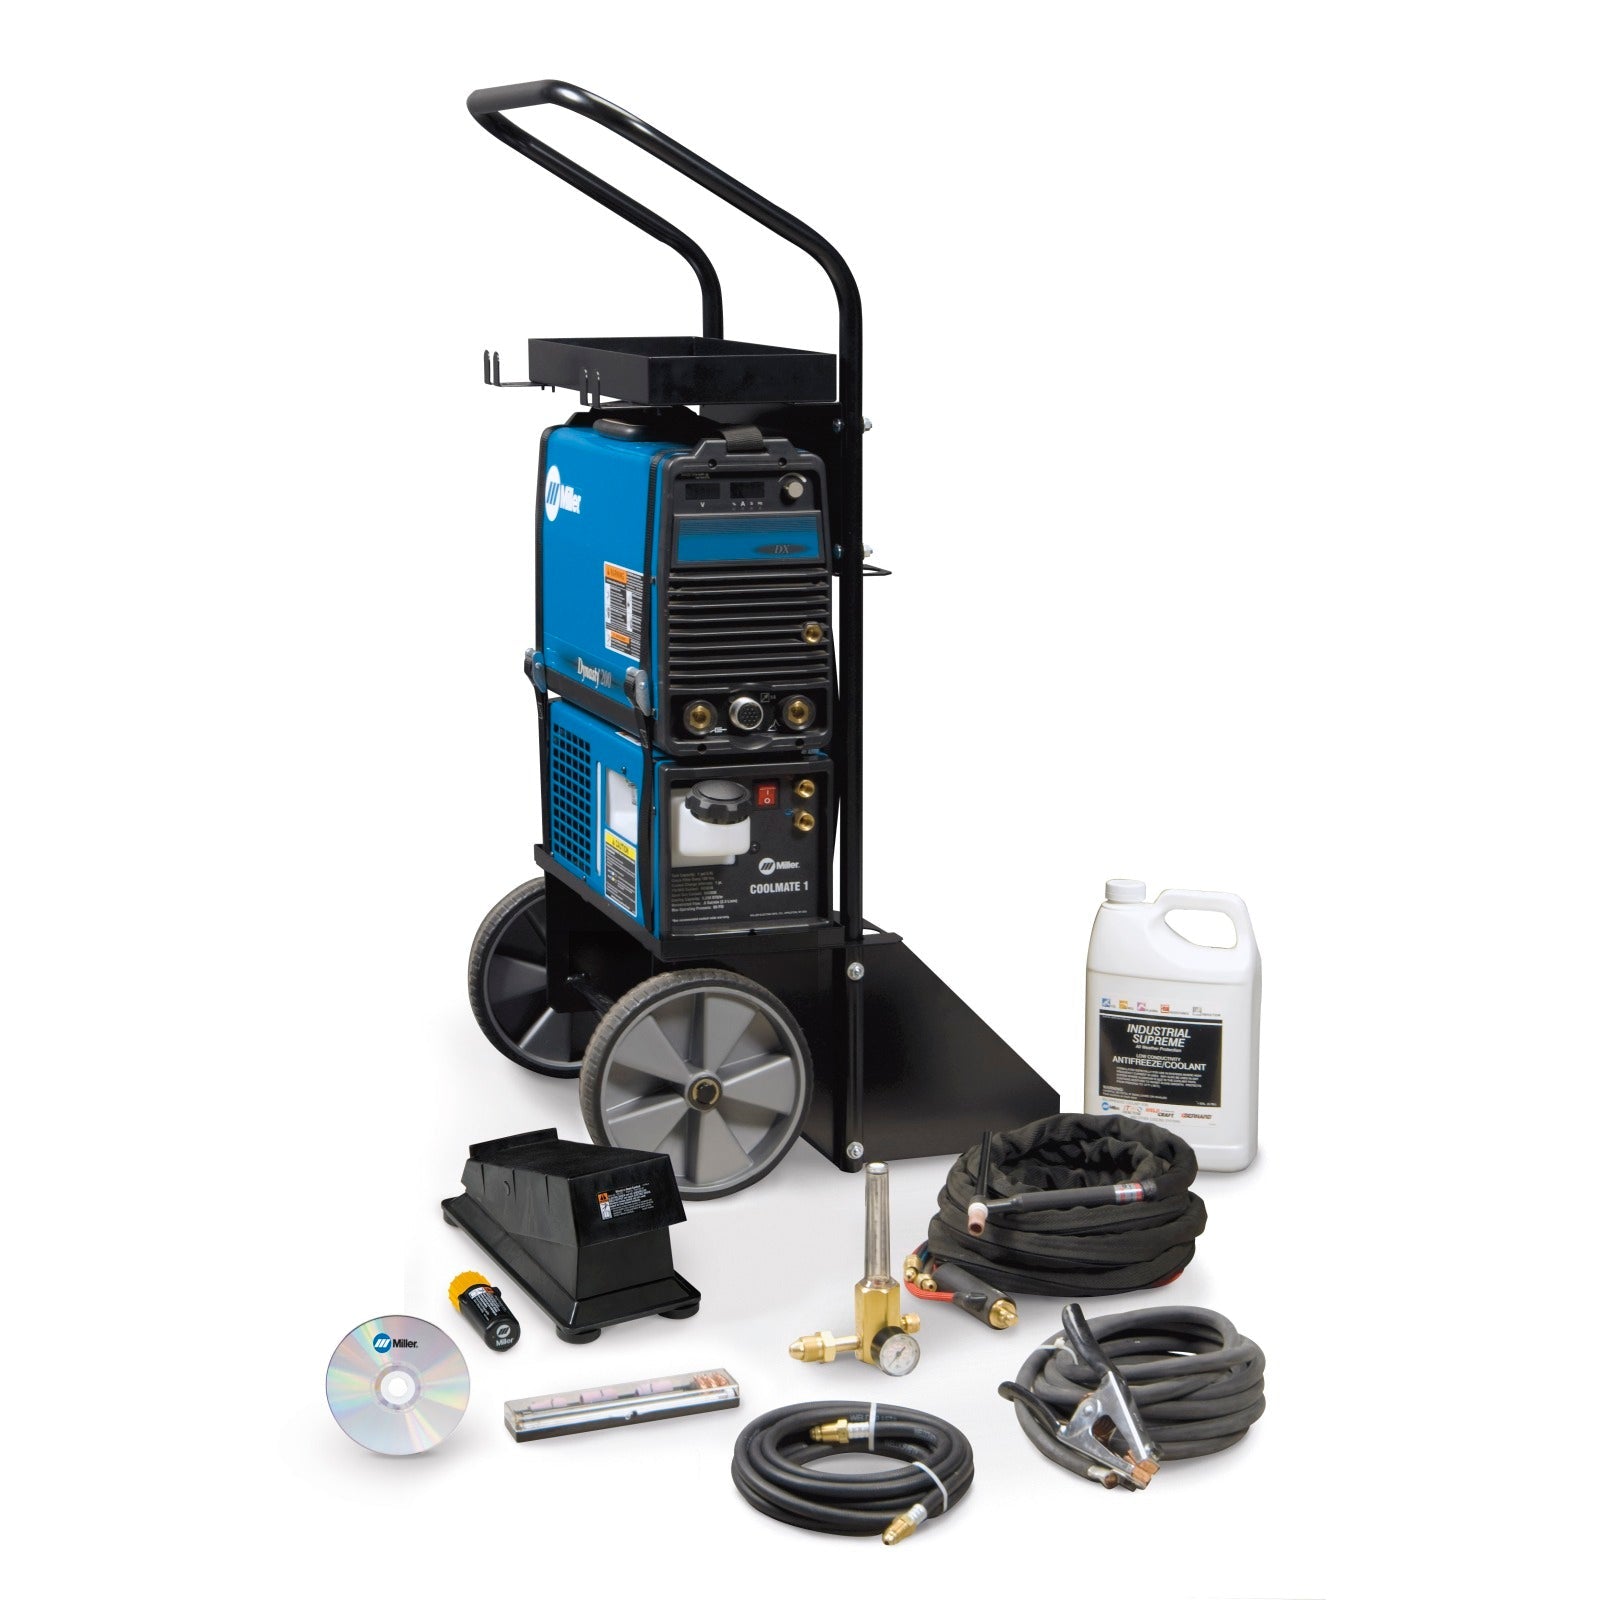 Miller Dynasty 200 DX TIG Welder and Water-Cooled Package with Wireless Foot Control (951397)